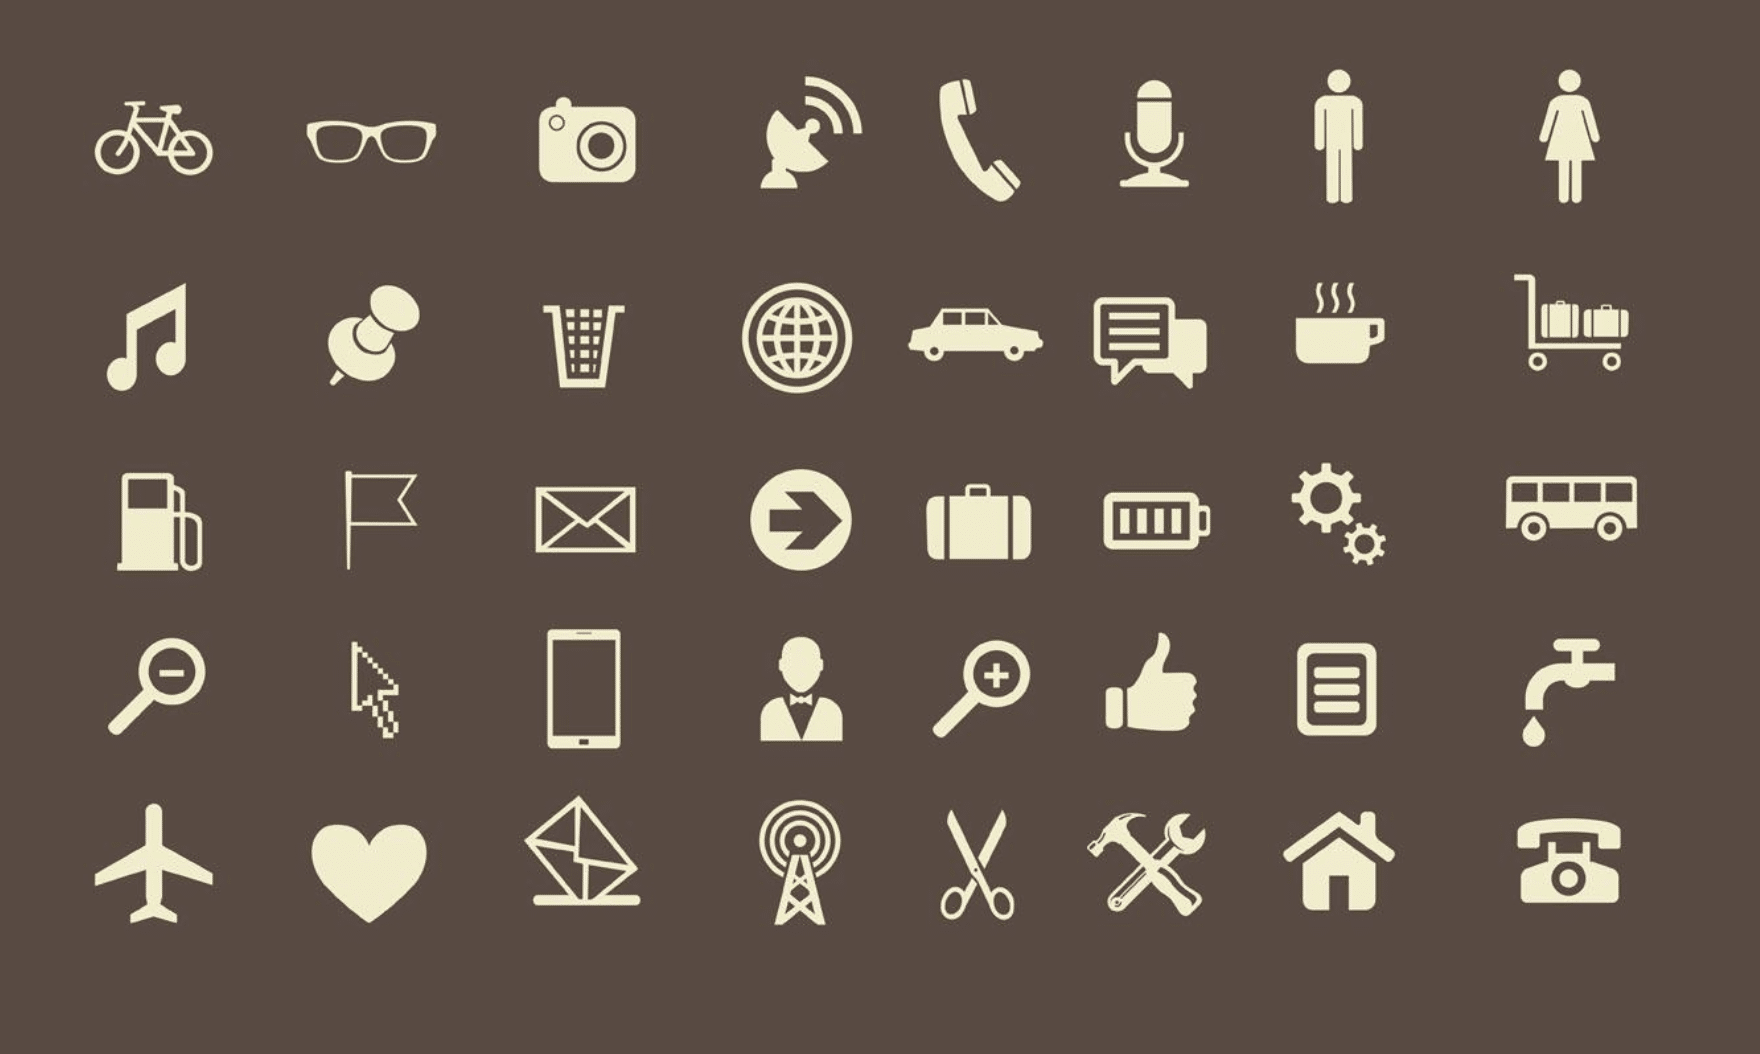 A screenshot of free vector icons from Vecteezy